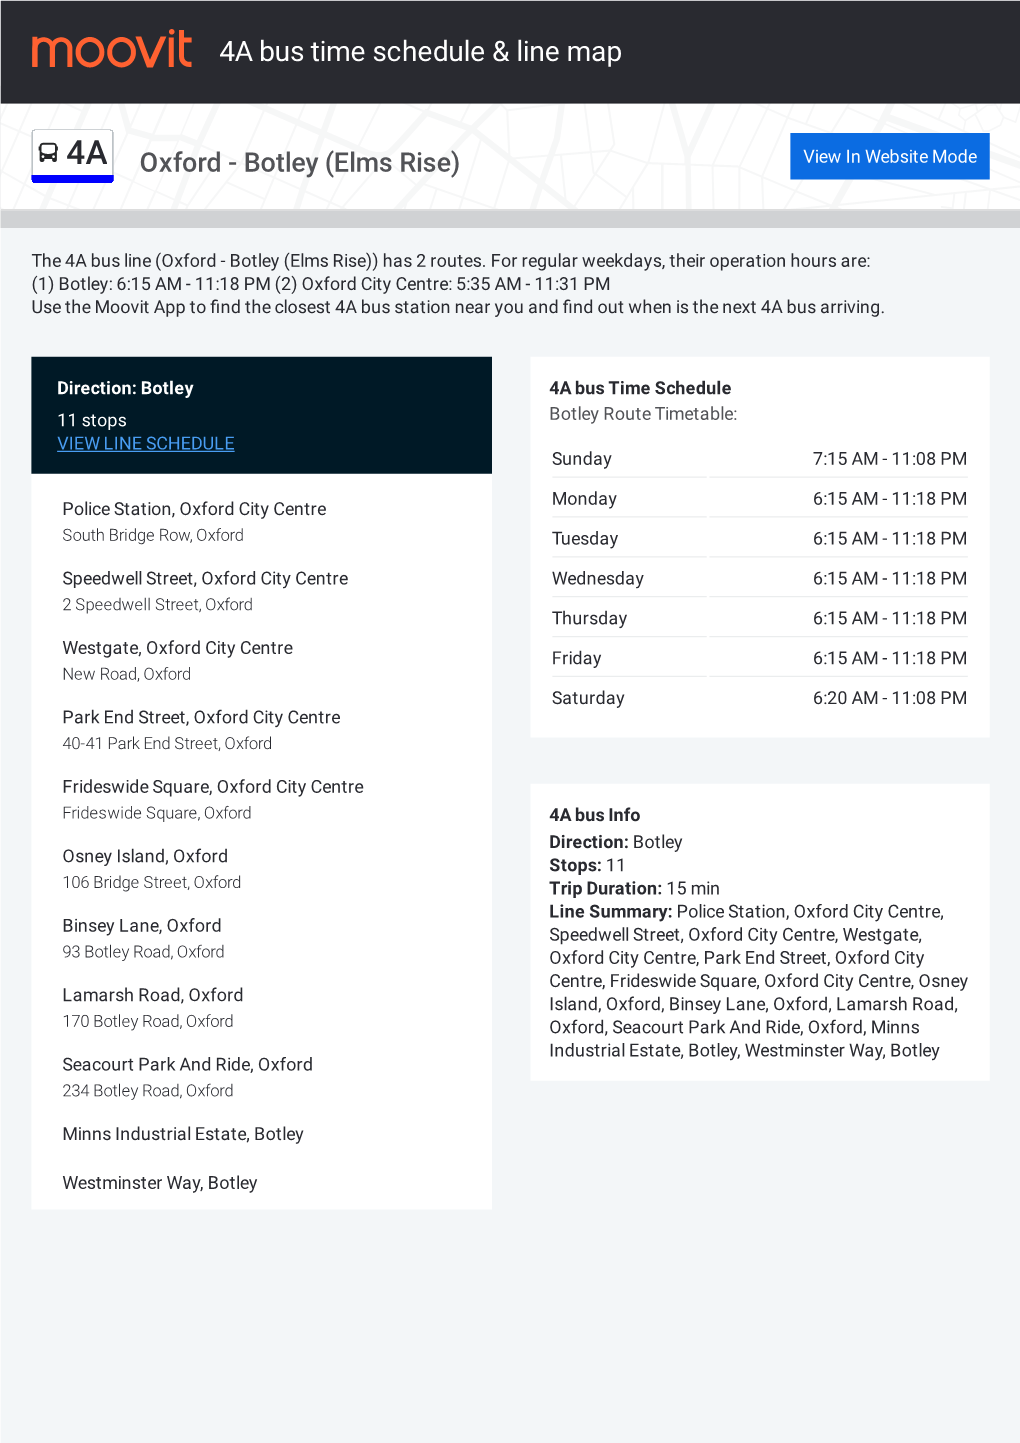 4A Bus Time Schedule & Line Route